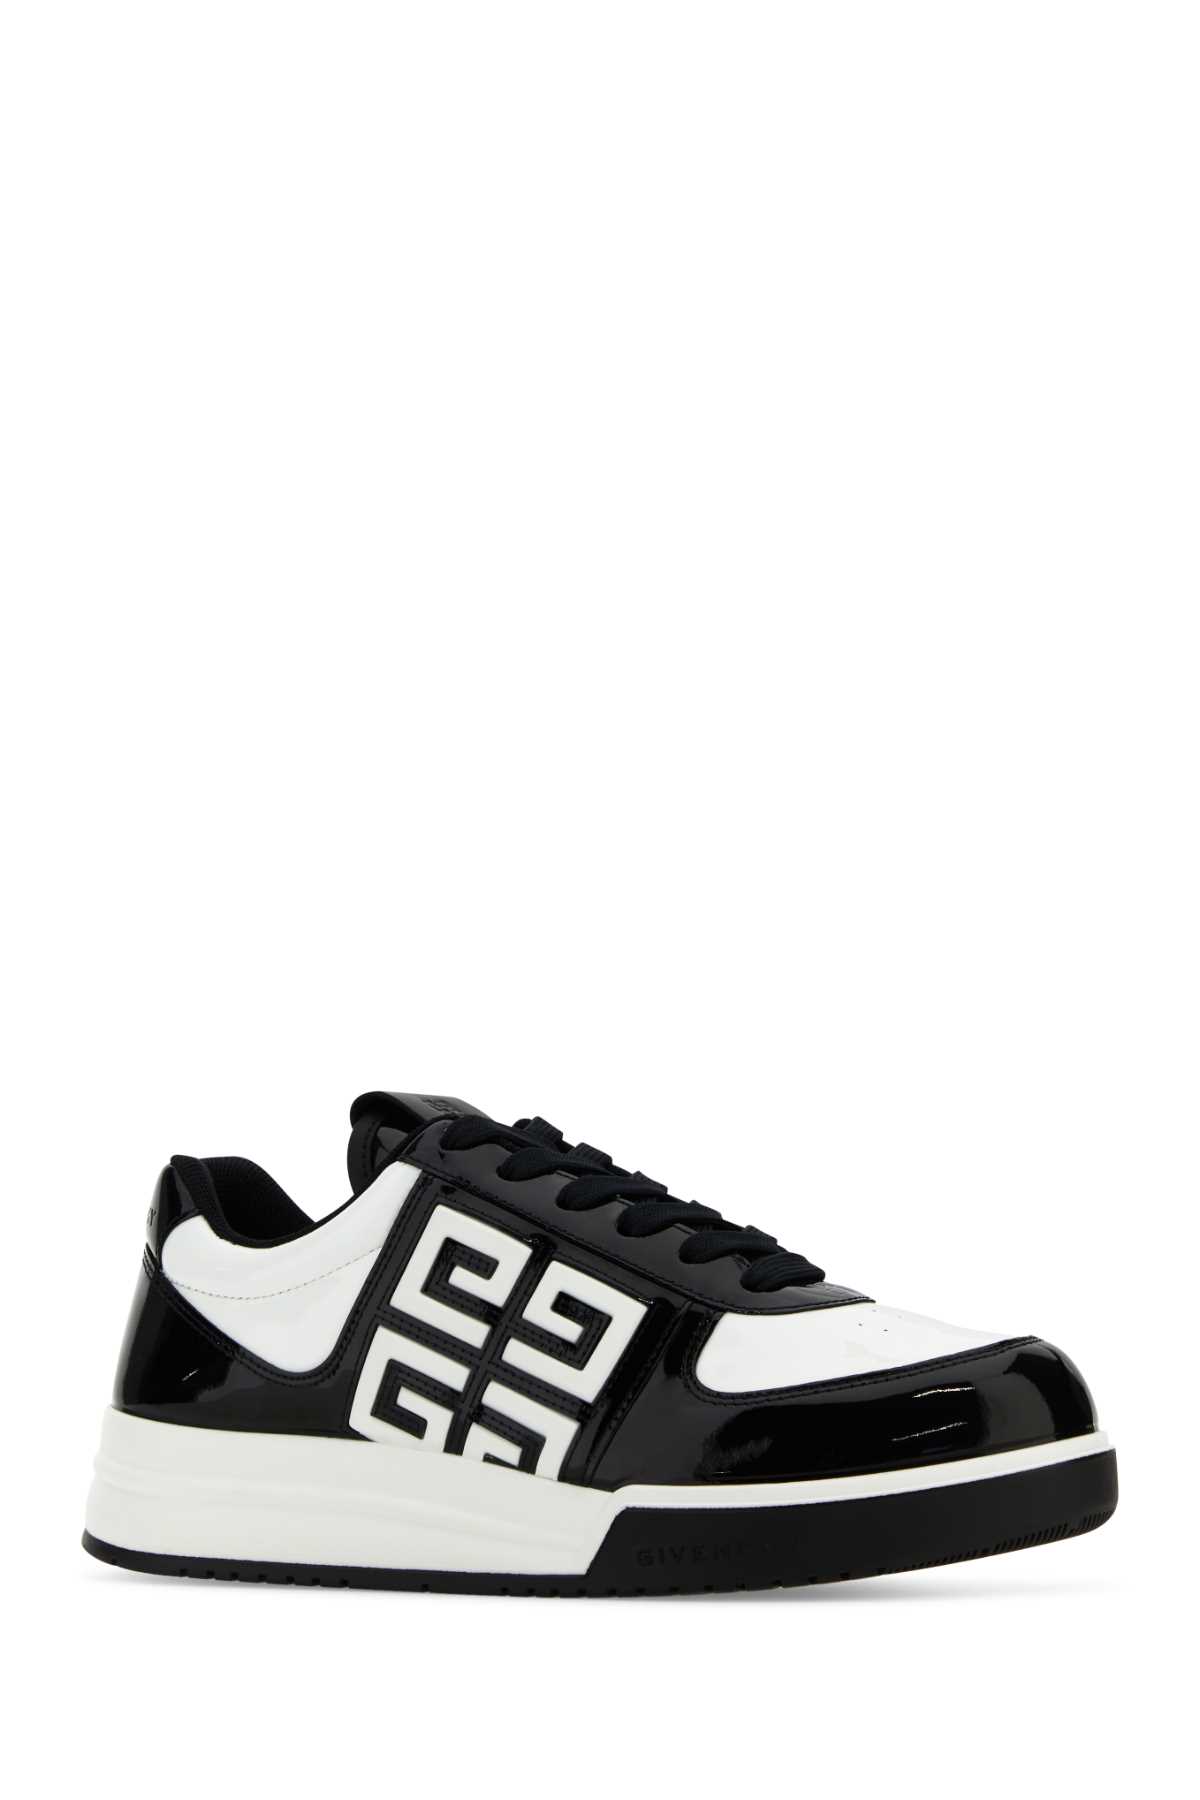 Shop Givenchy Two-tone Leather G4 Sneakers In Black/white